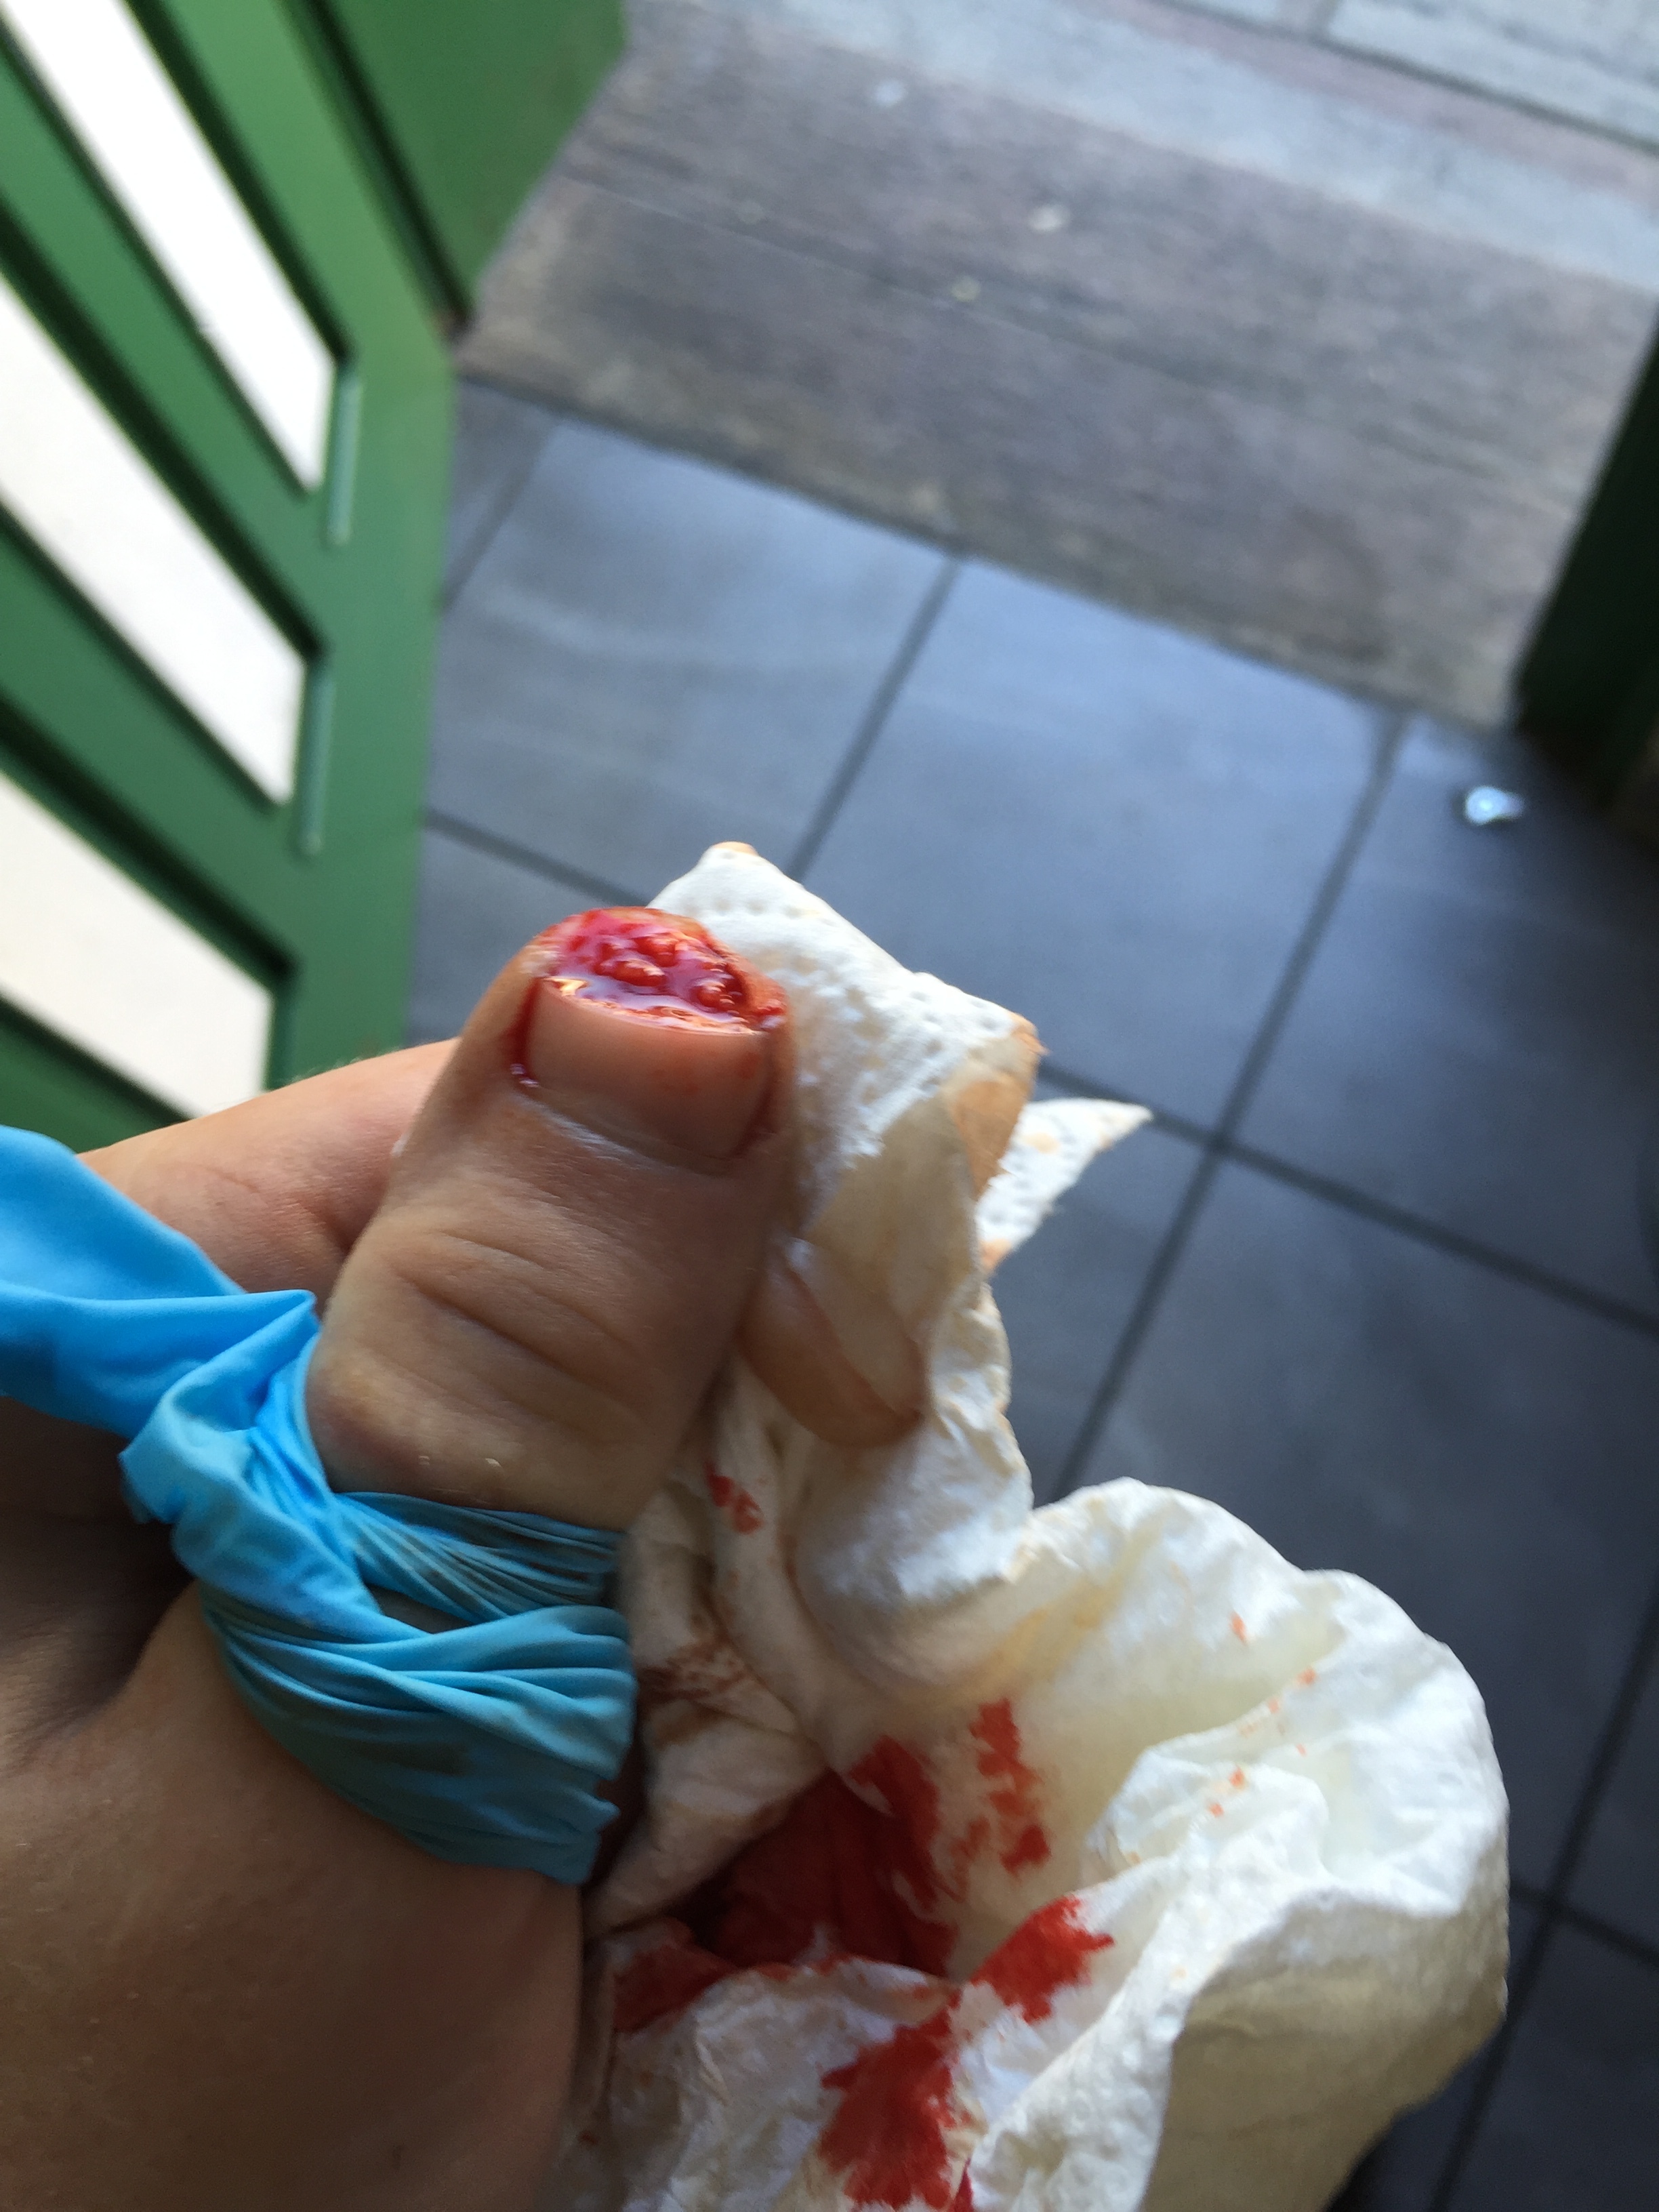 In 2016 I sliced onions and a bit of my thumb